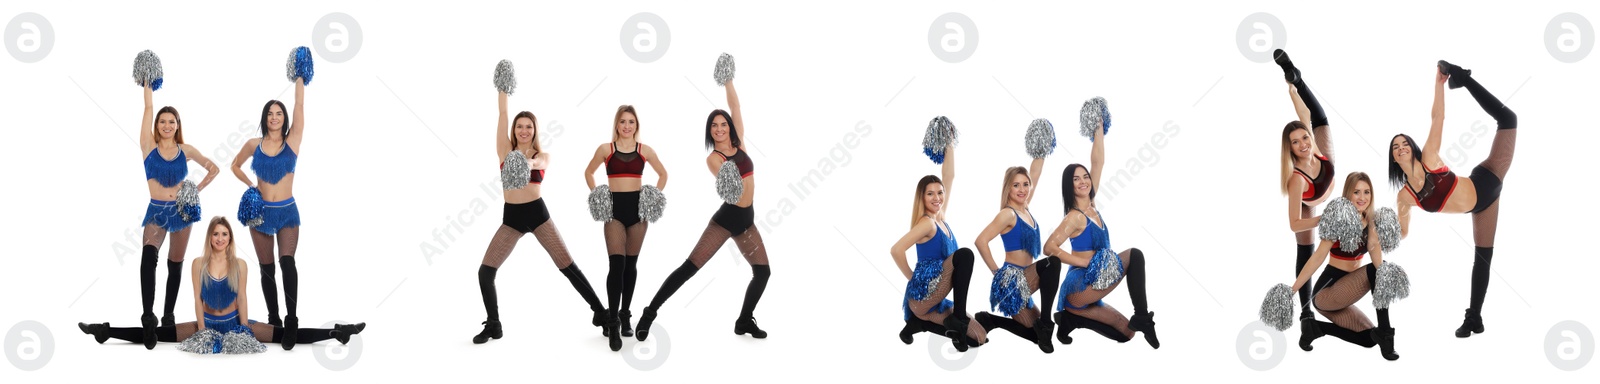 Image of Collage with photos of beautiful happy cheerleaders with pom poms in uniforms on white background